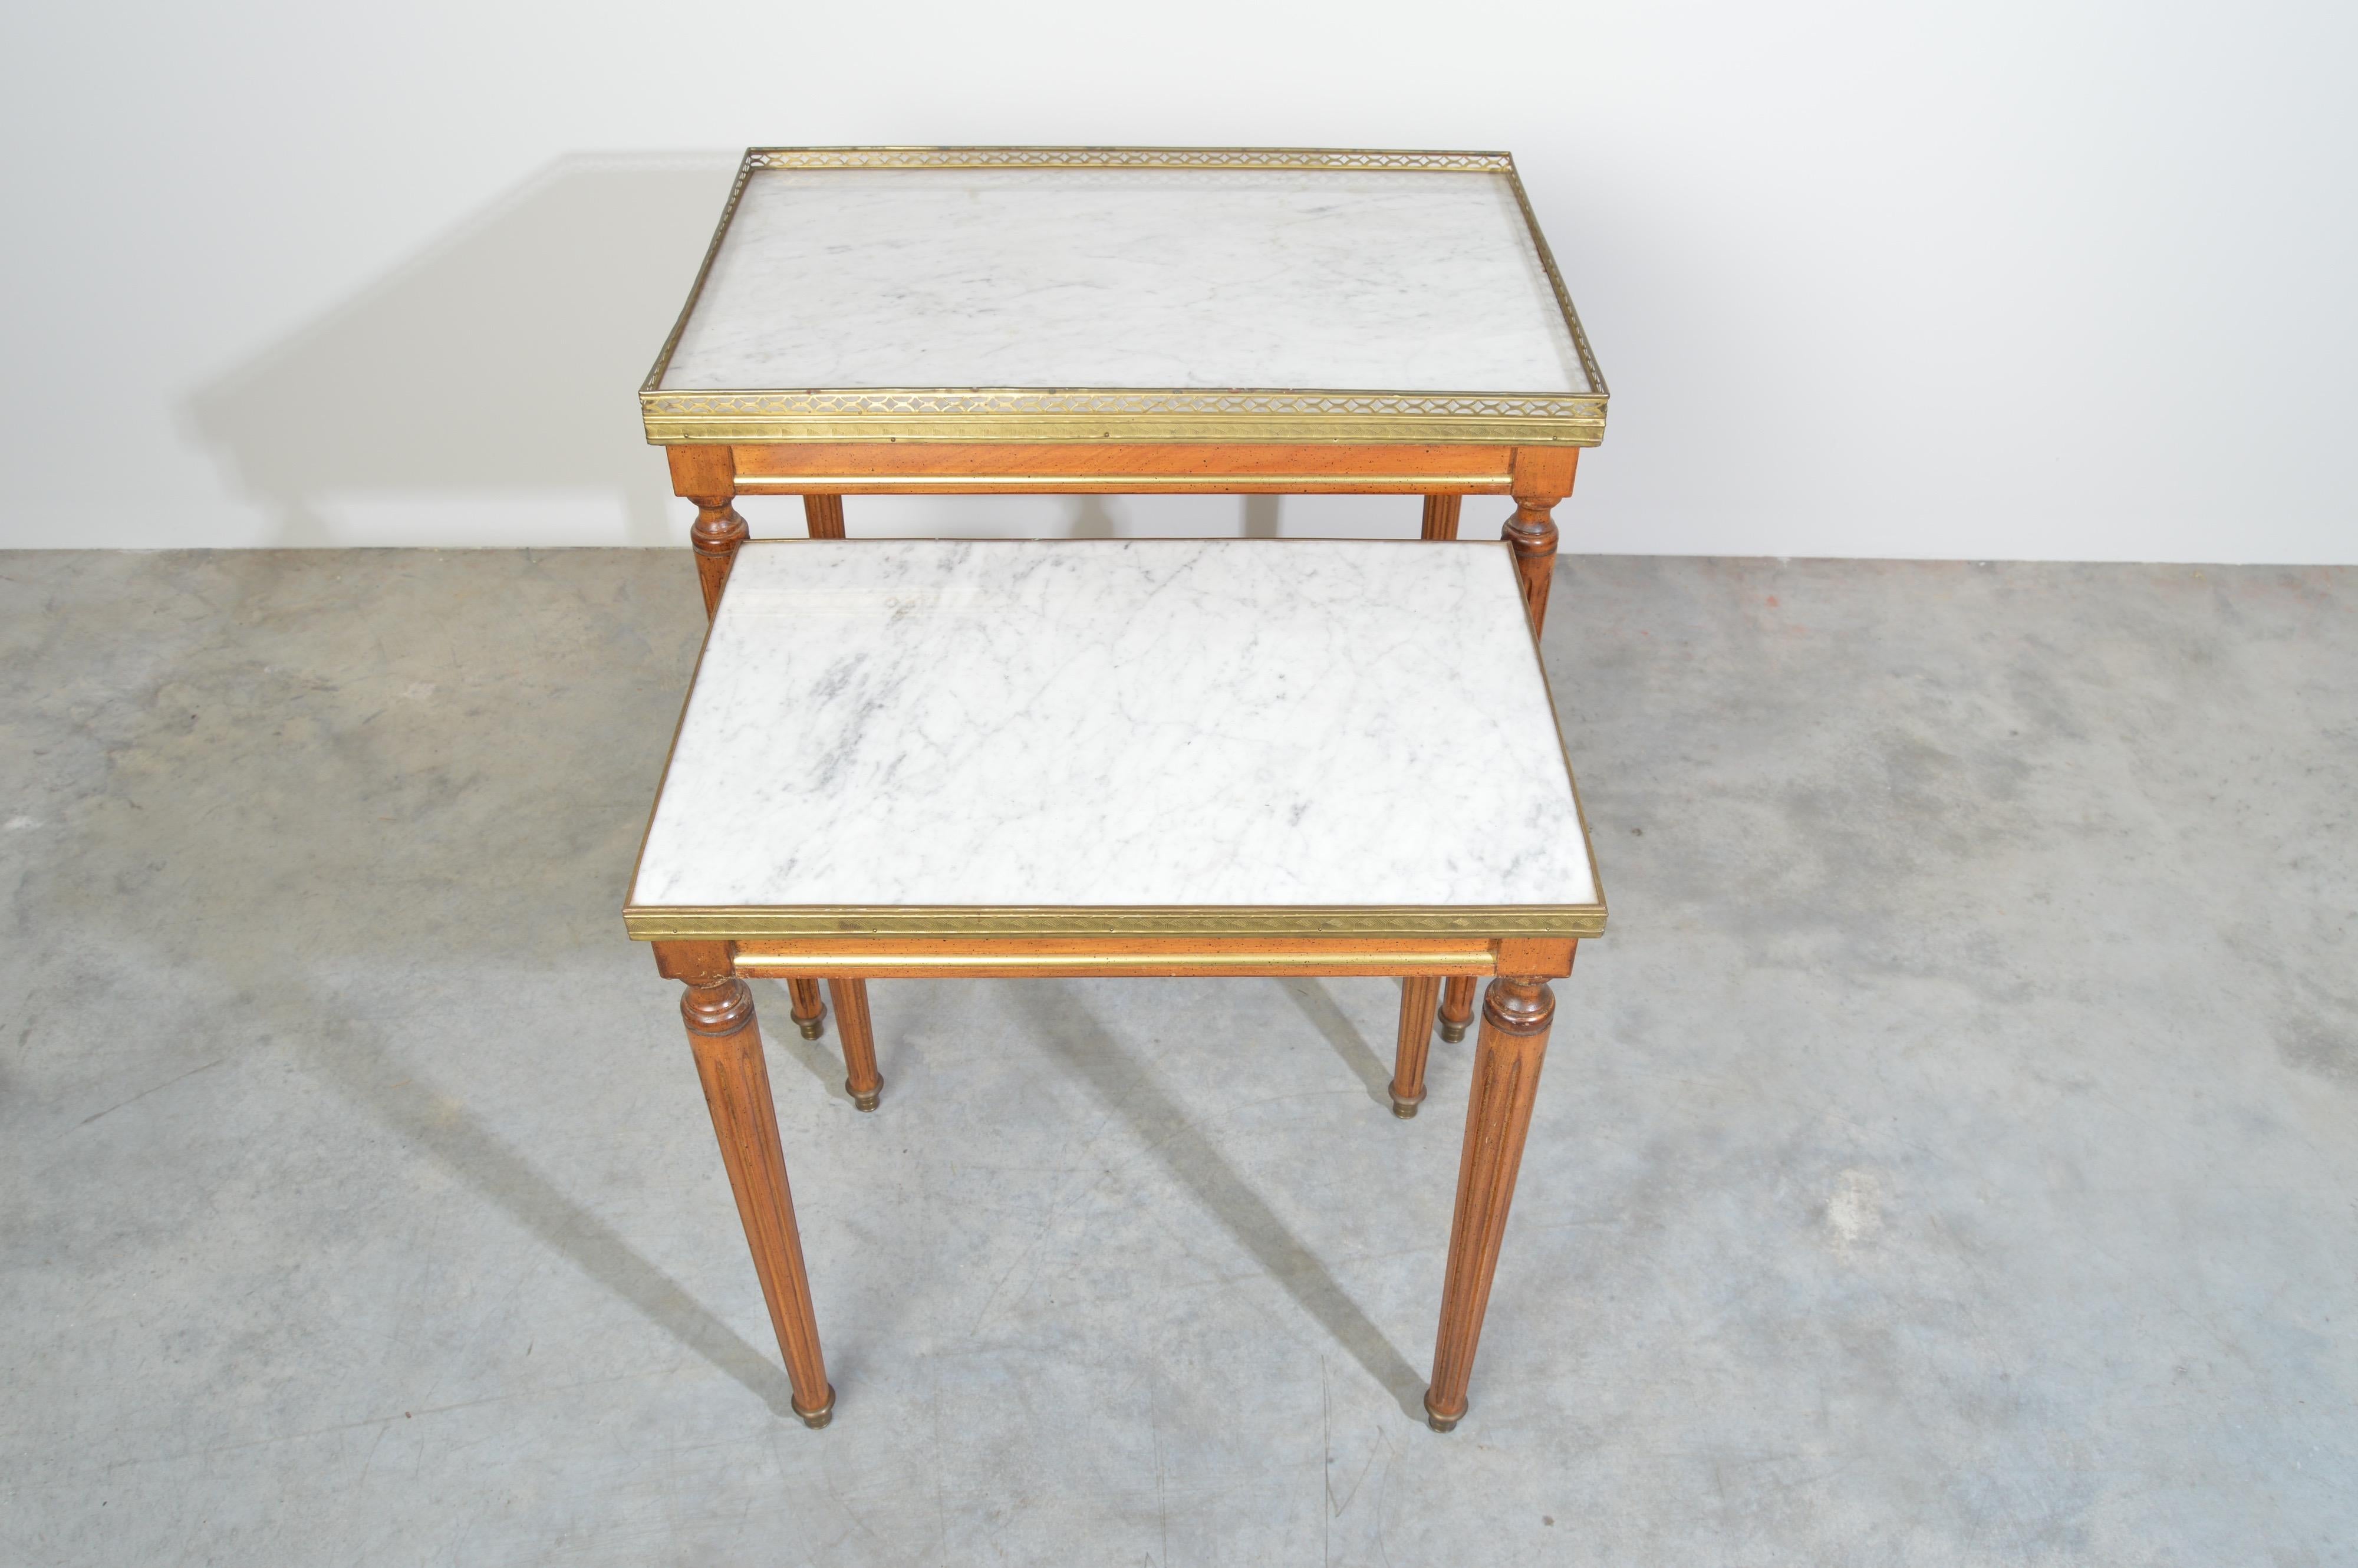 American Louis XVI Style Nesting Tables in Mahogany & Carrara Marble with Brass Gallery